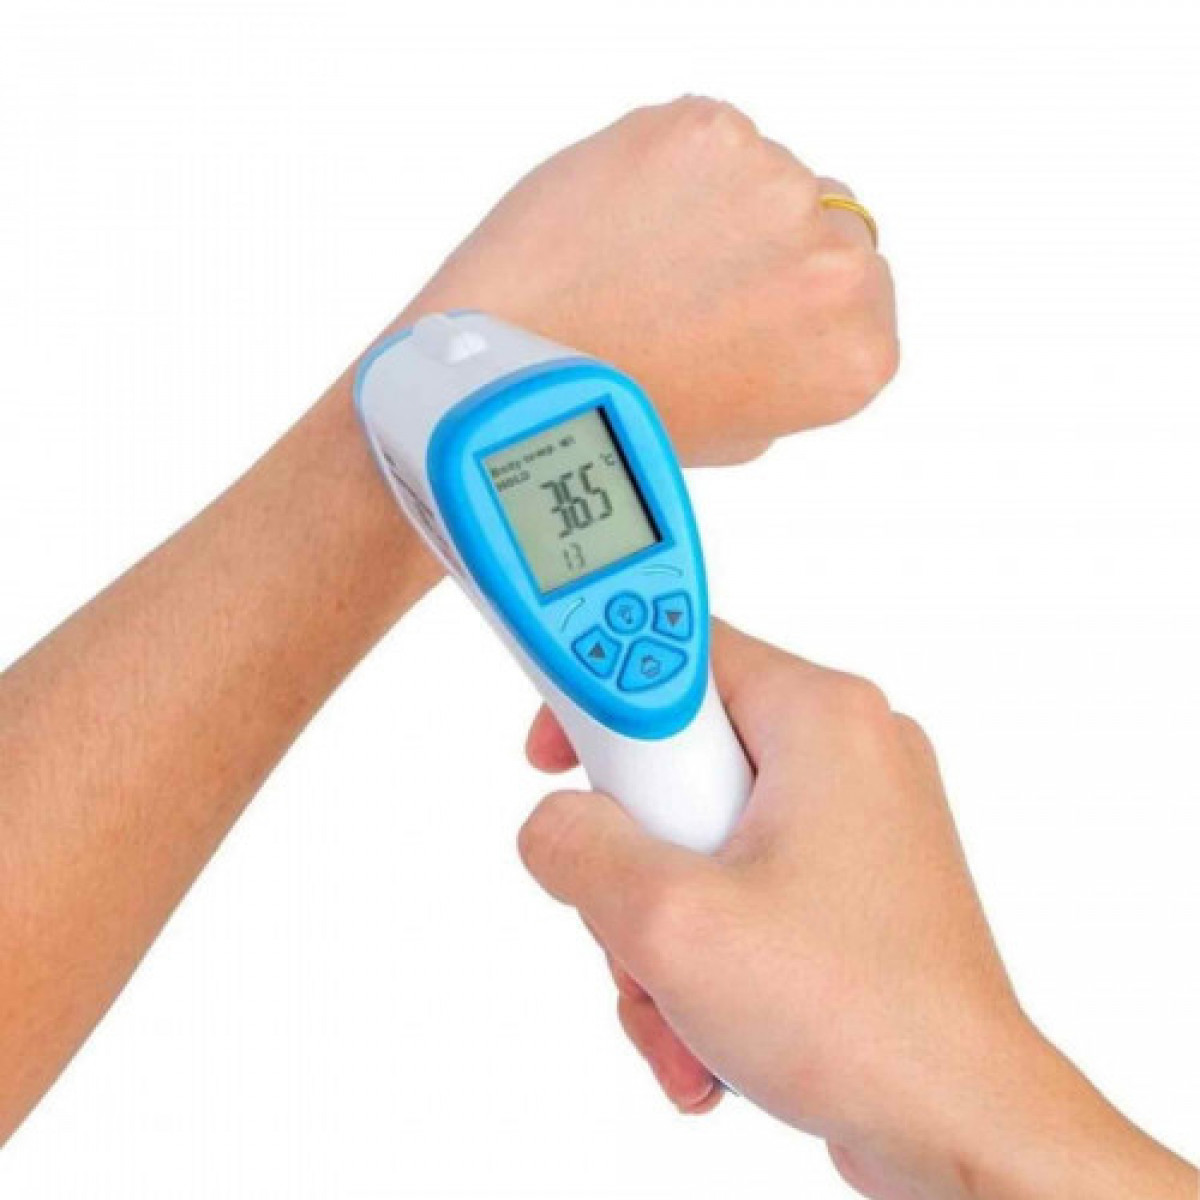 Thermometer Manufacturers in India